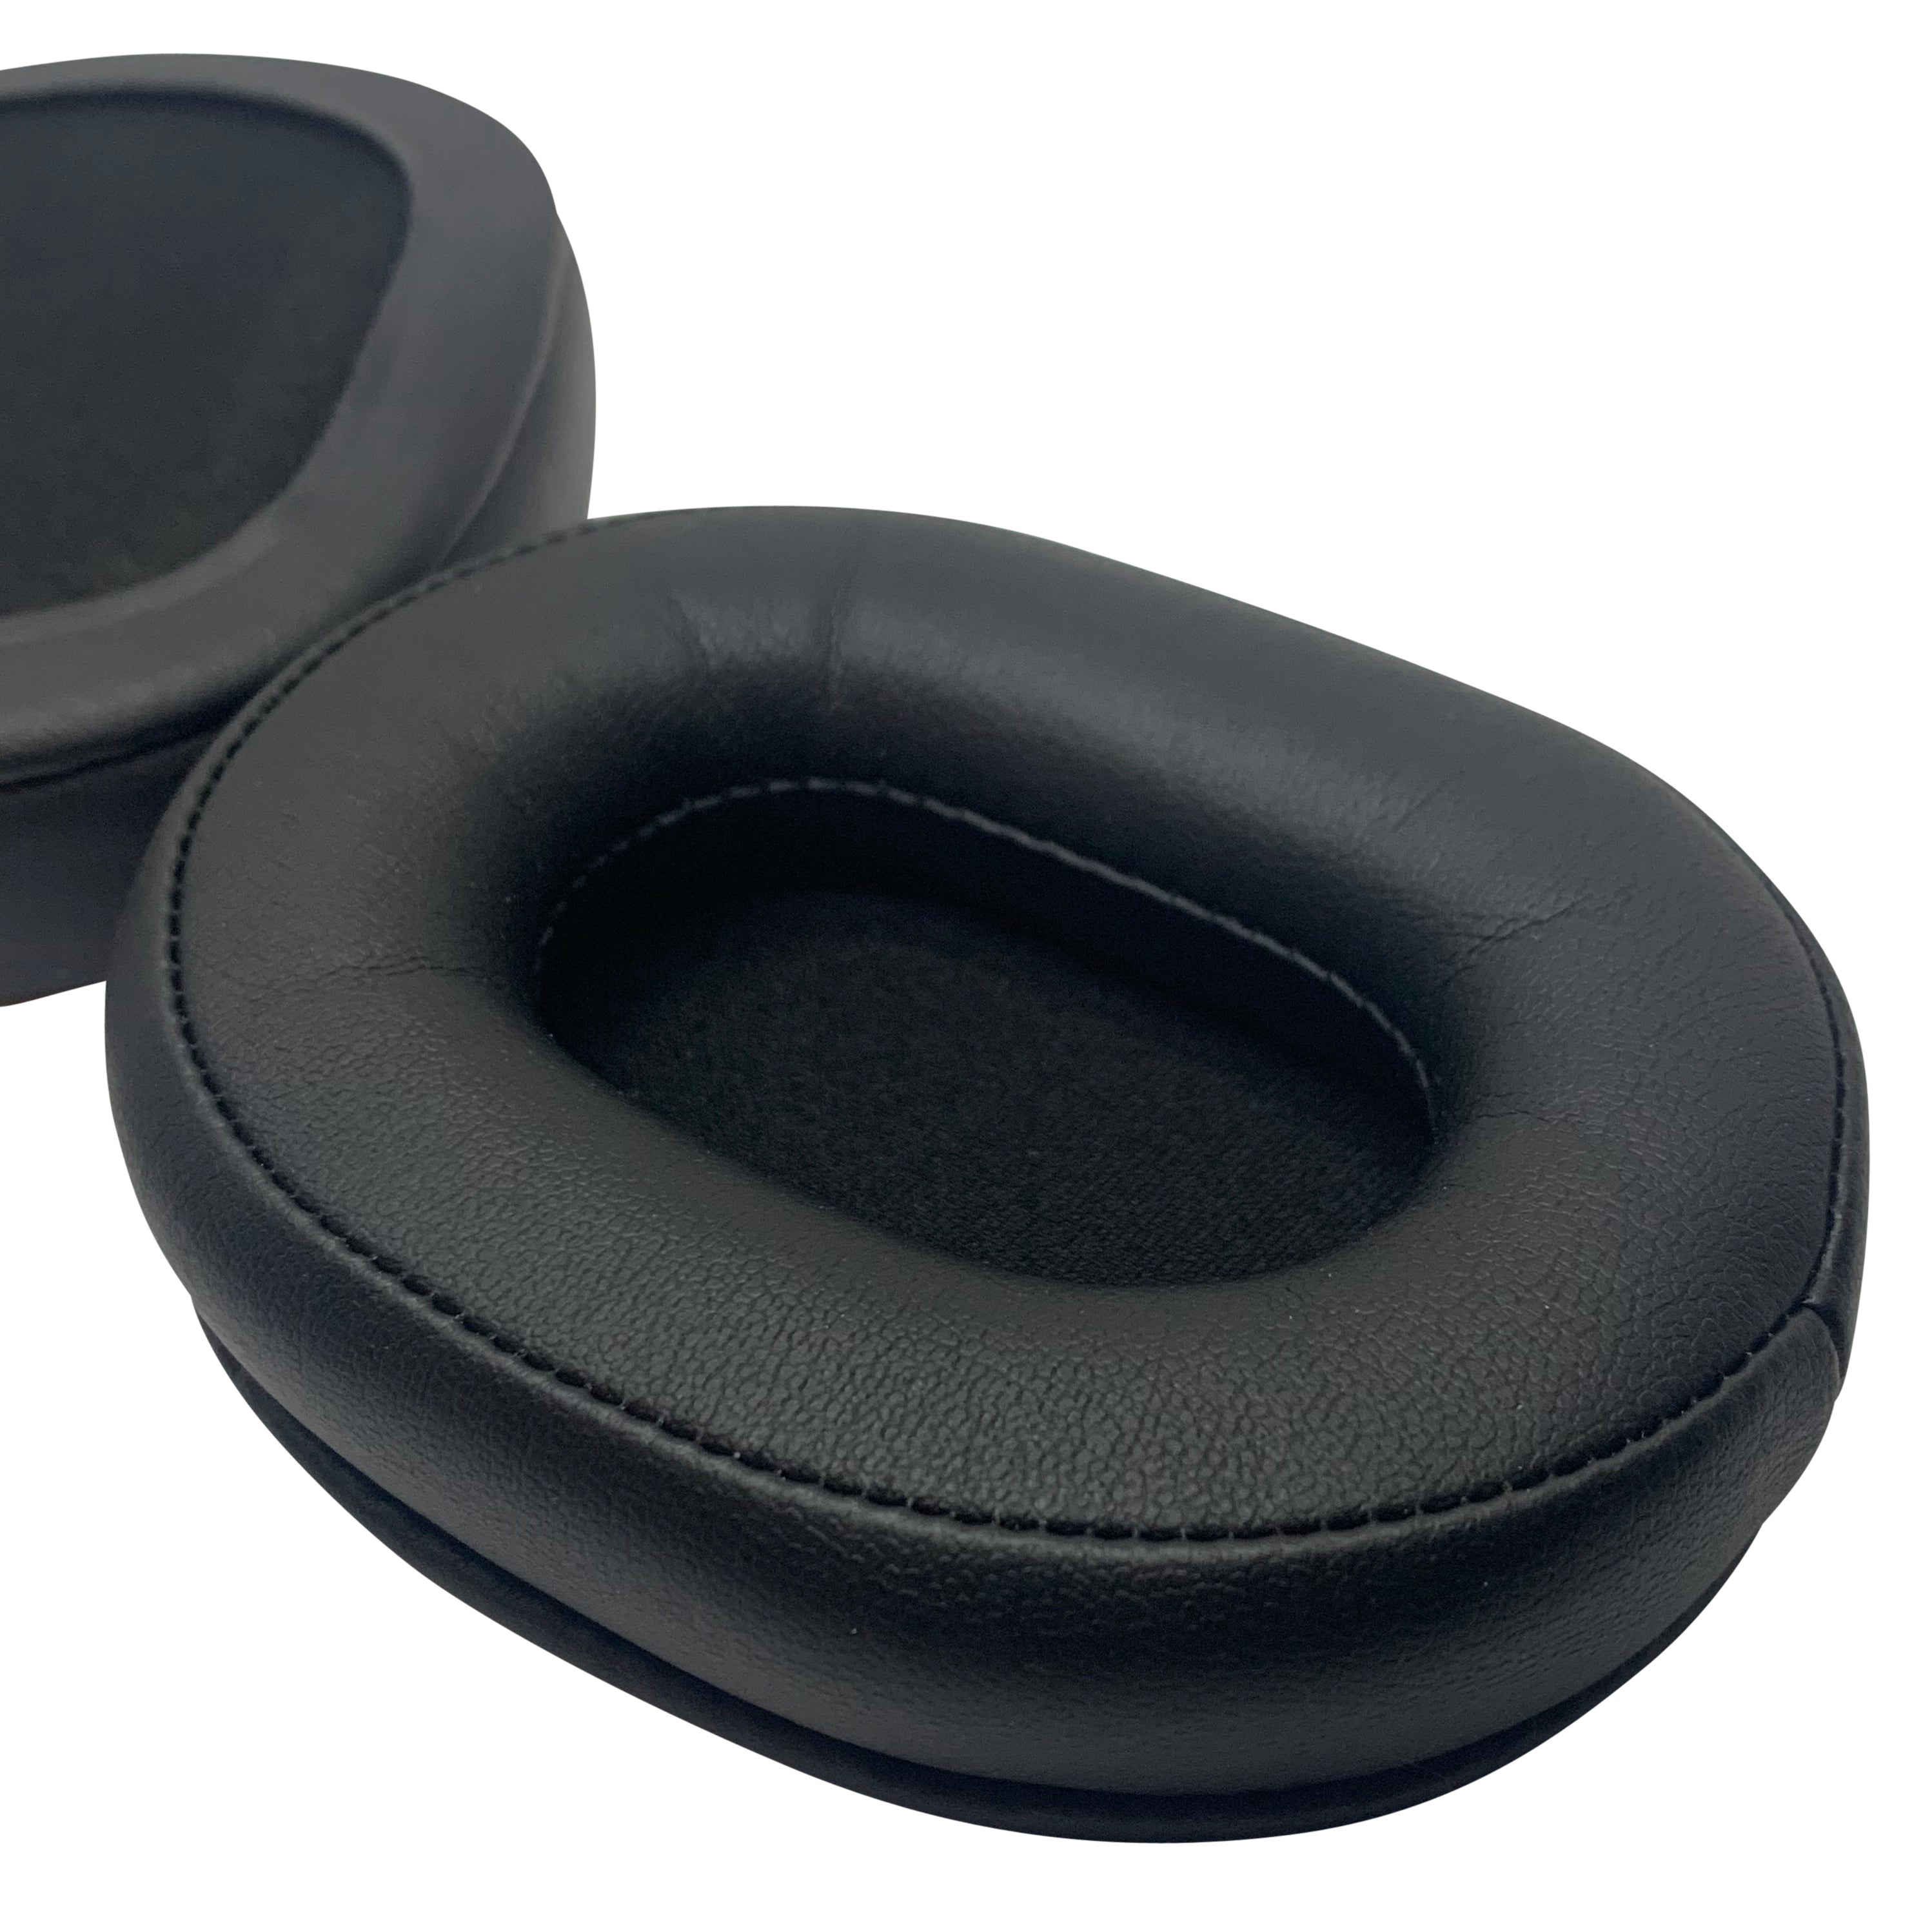 CentralSound Premium Memory Foam Ear Pad Cushions for Audio-Technica M Series Headphones - CentralSound